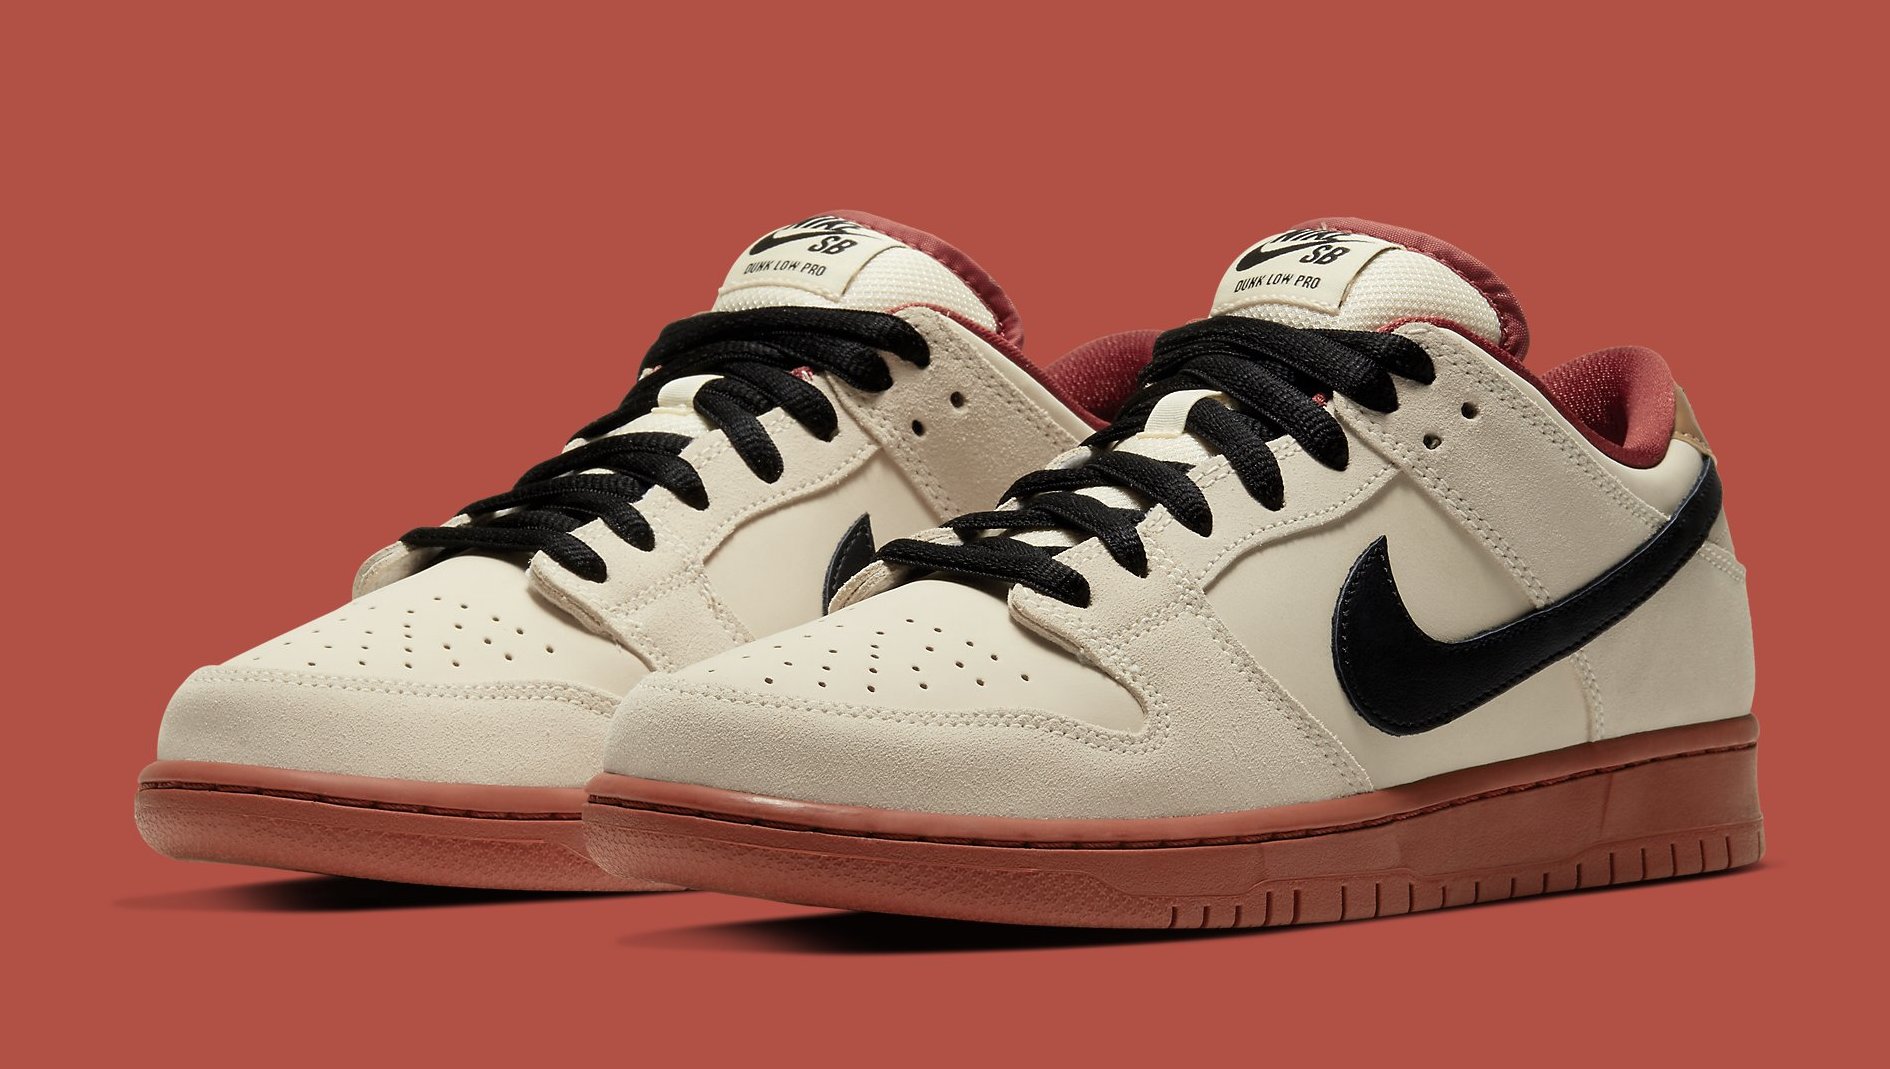 Muslin' Nike SB Dunk Lows Are Releasing in April | Complex